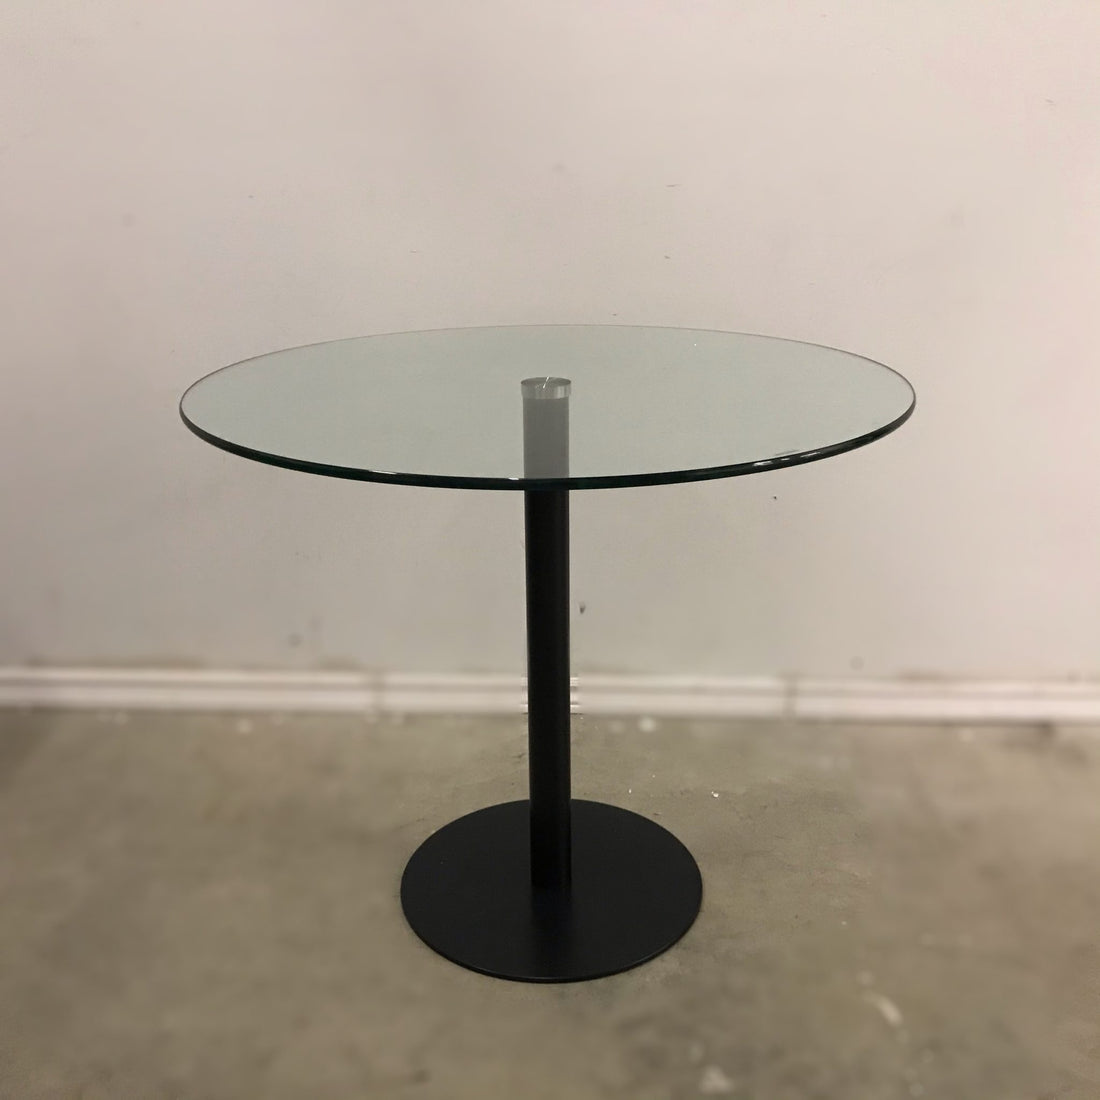 36″ ROUND GLASS TABLE (BLACK BASE)